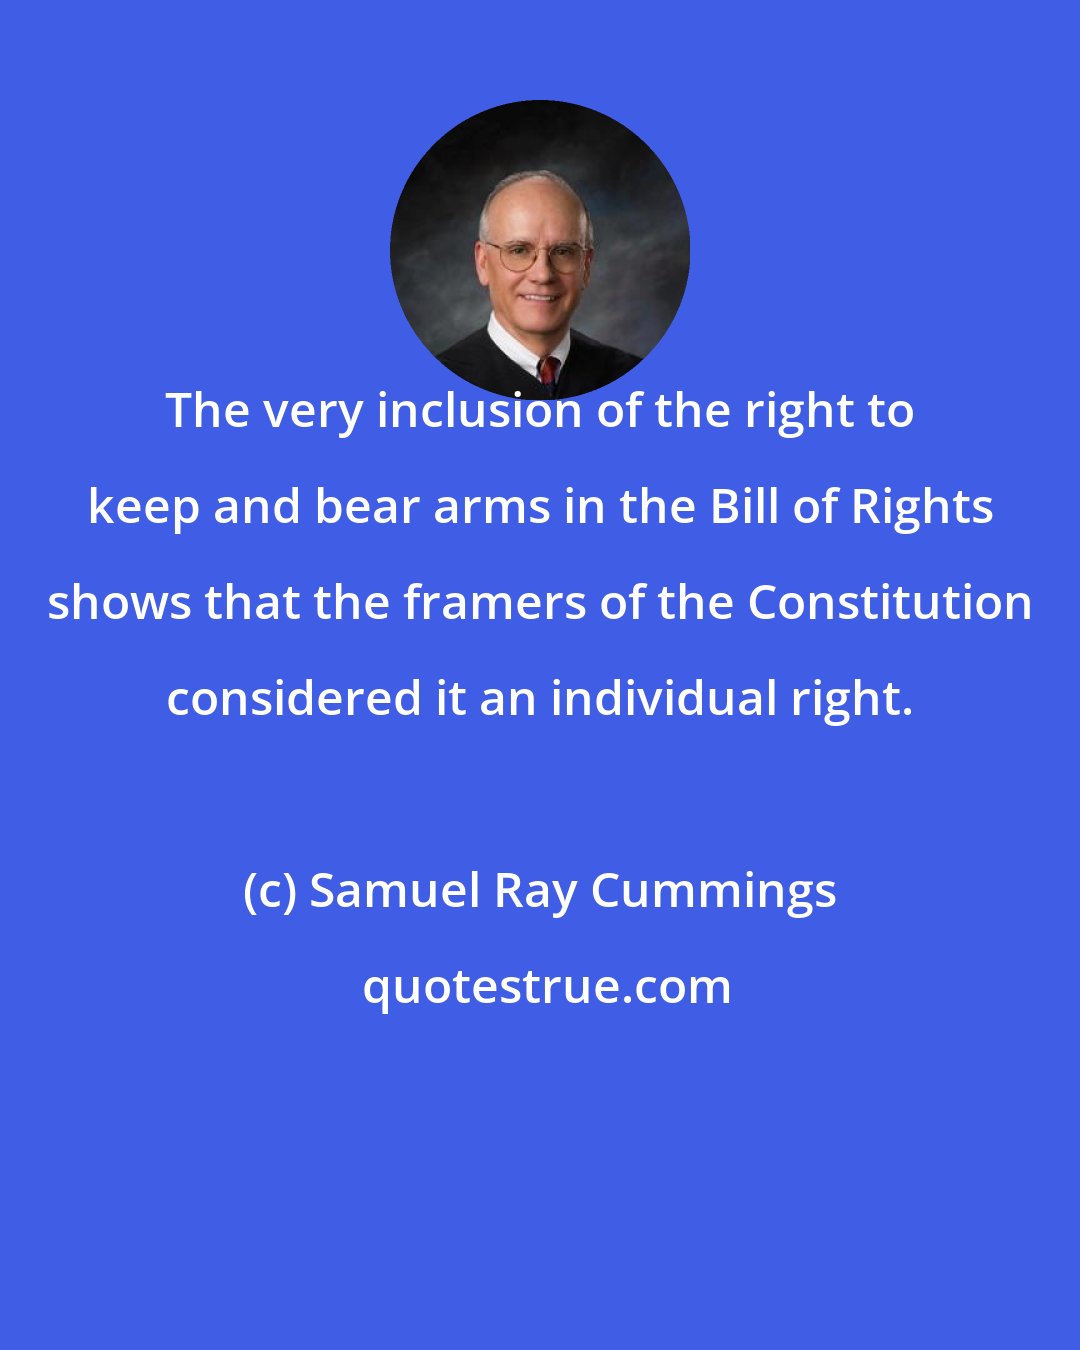 Samuel Ray Cummings: The very inclusion of the right to keep and bear arms in the Bill of Rights shows that the framers of the Constitution considered it an individual right.